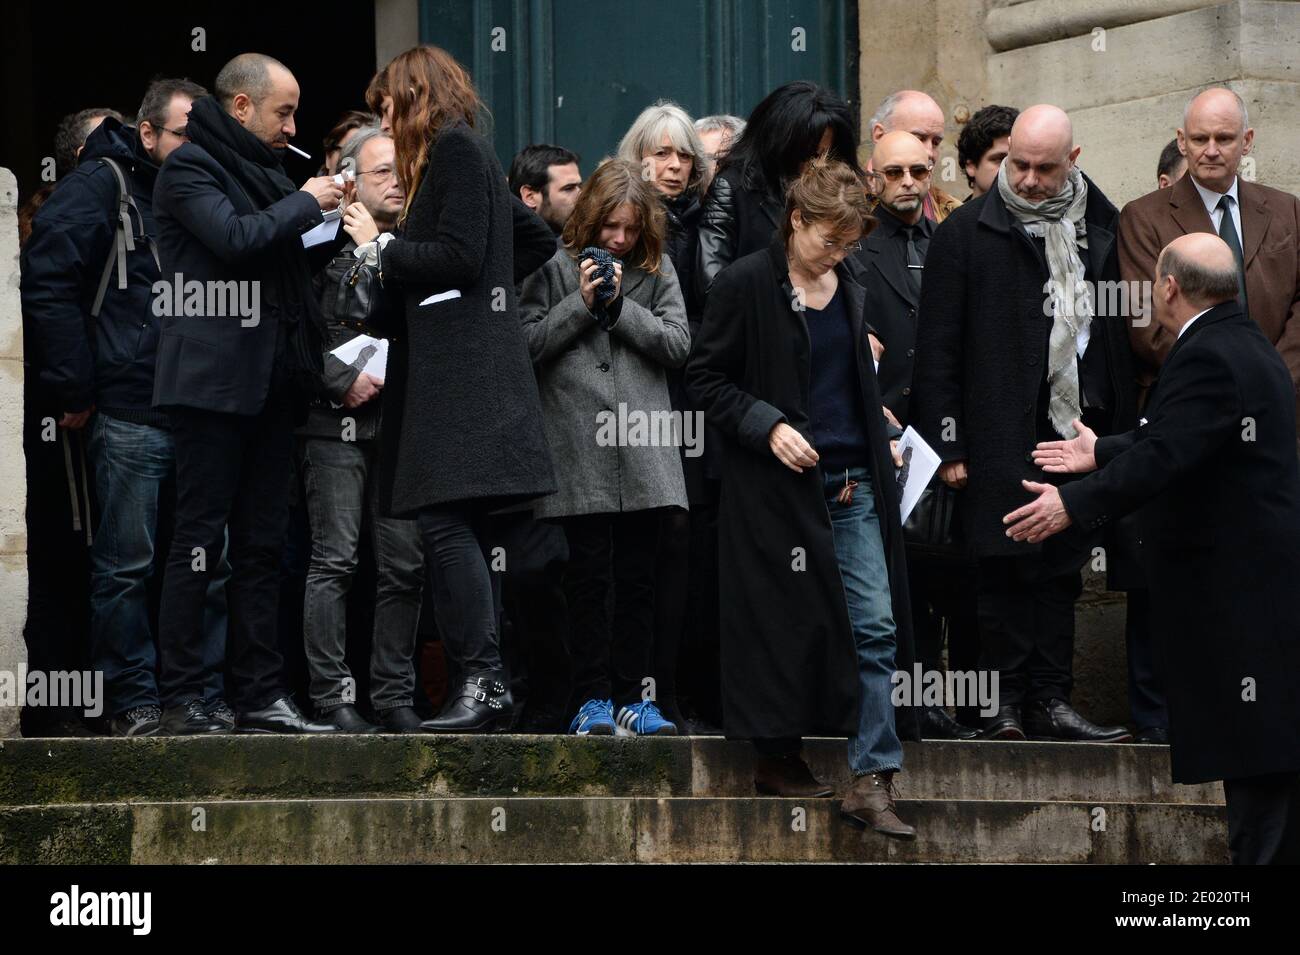 Please hide the children's faces prior to the publication Lou Doillon and Jane Birkin attending a tribute mass for Kate Barry held at Saint Roch church in Paris, France on December 19, 2013. Photographer Kate Barry, the daughter of Jane Birkin and John Barry has been found dead on December 11 after falling from the window of her apartment in Paris. She was 46. Photo by ABACAPRESS.COM Stock Photo